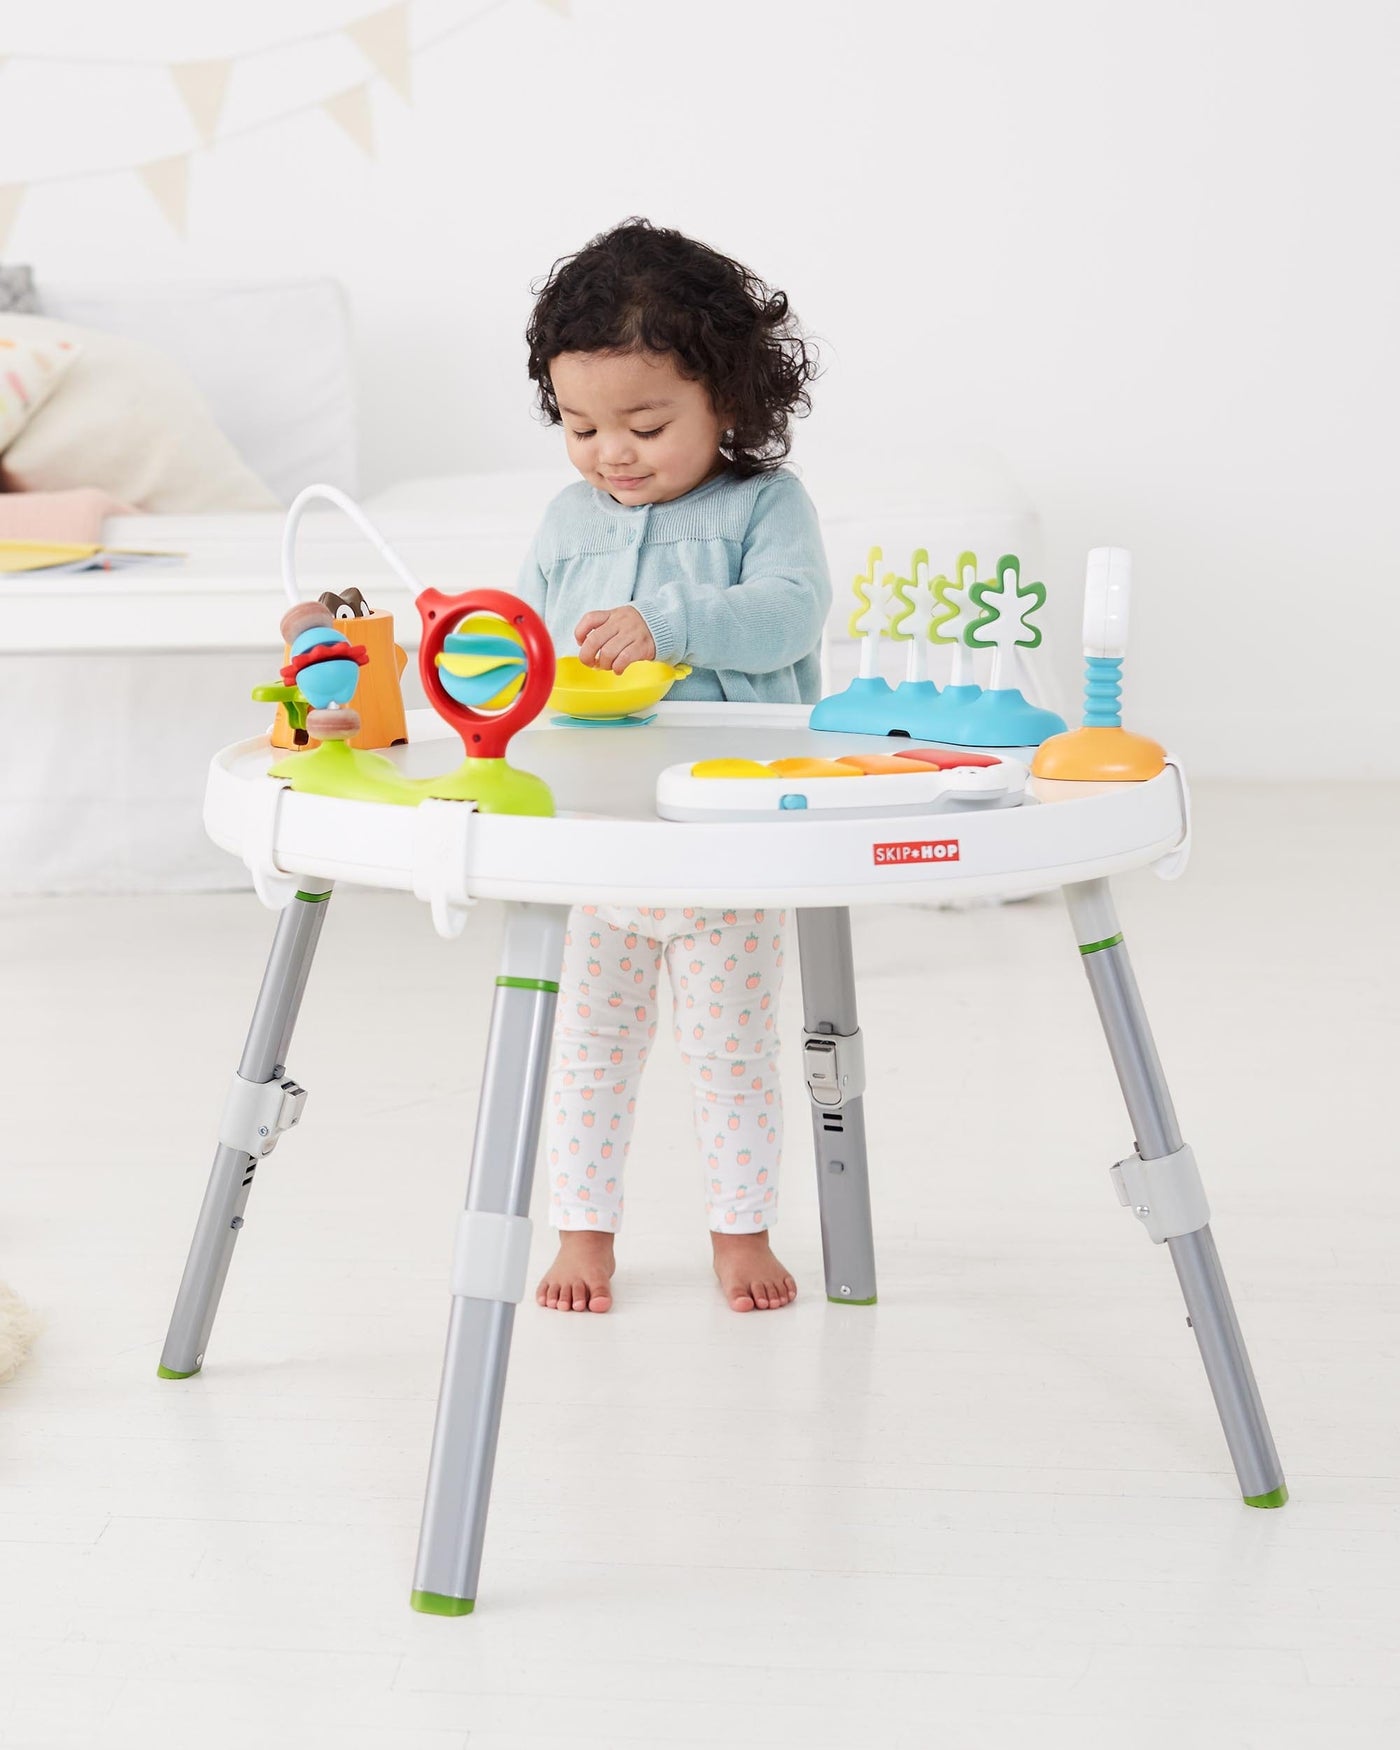 Skip Hop Explore & More Baby's View 3 Stage Activity Center